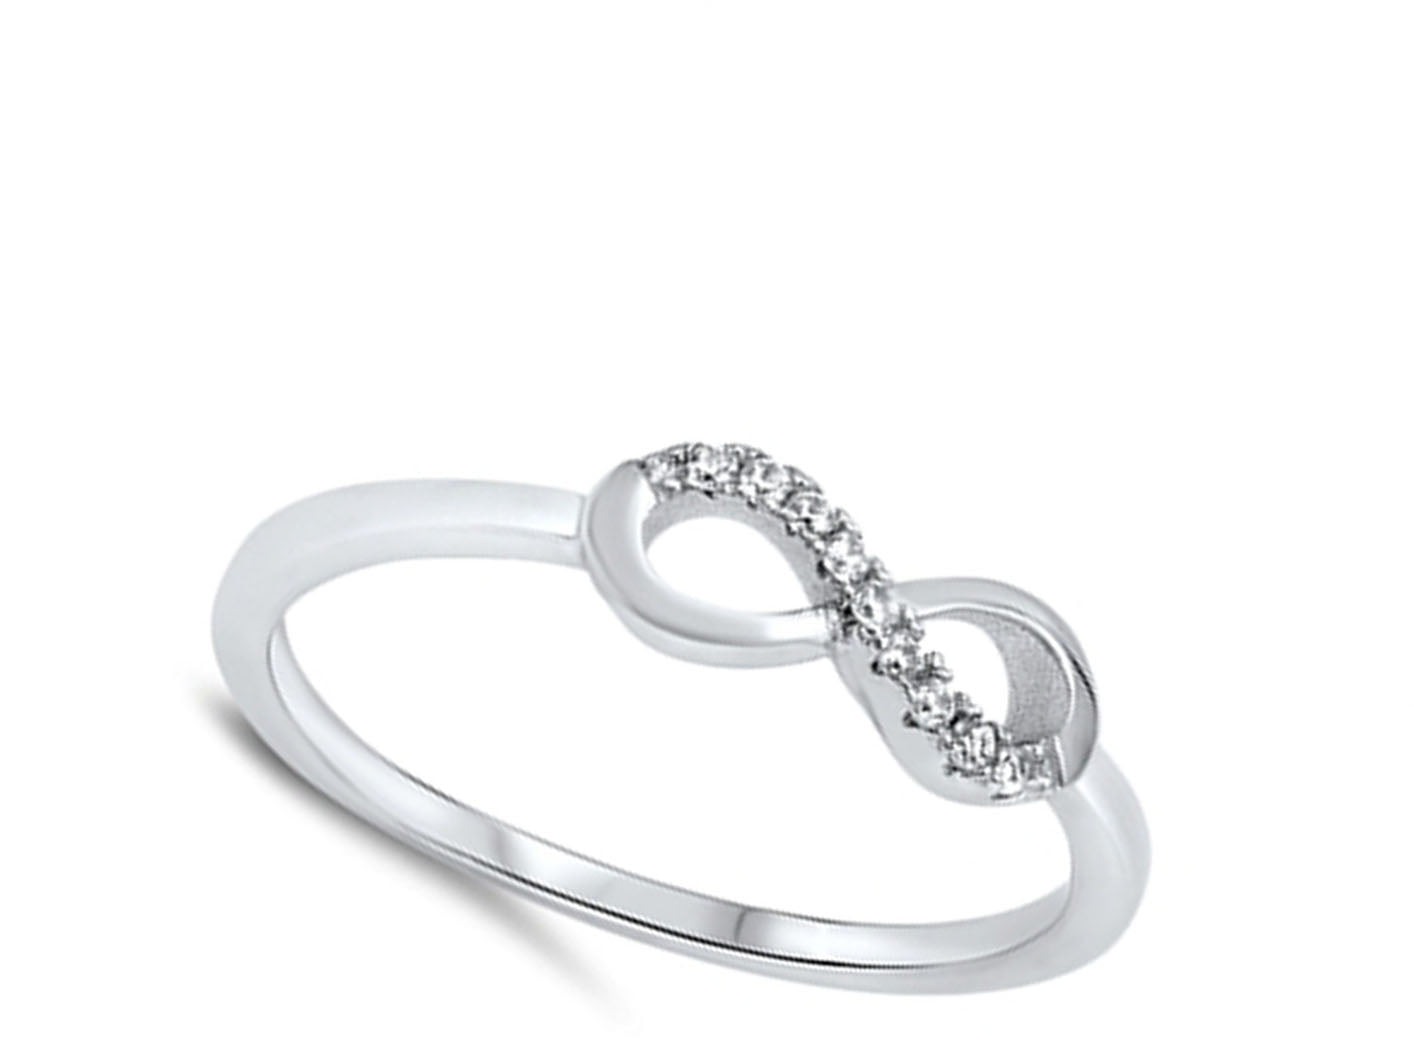 Heart Clear CZ Halo Promise Ring ( Sizes 4 5 6 7 8 9 10 11 12 ) .925 Sterling Silver Infinity Band Rings by Sac Silver (Size 11), Women's